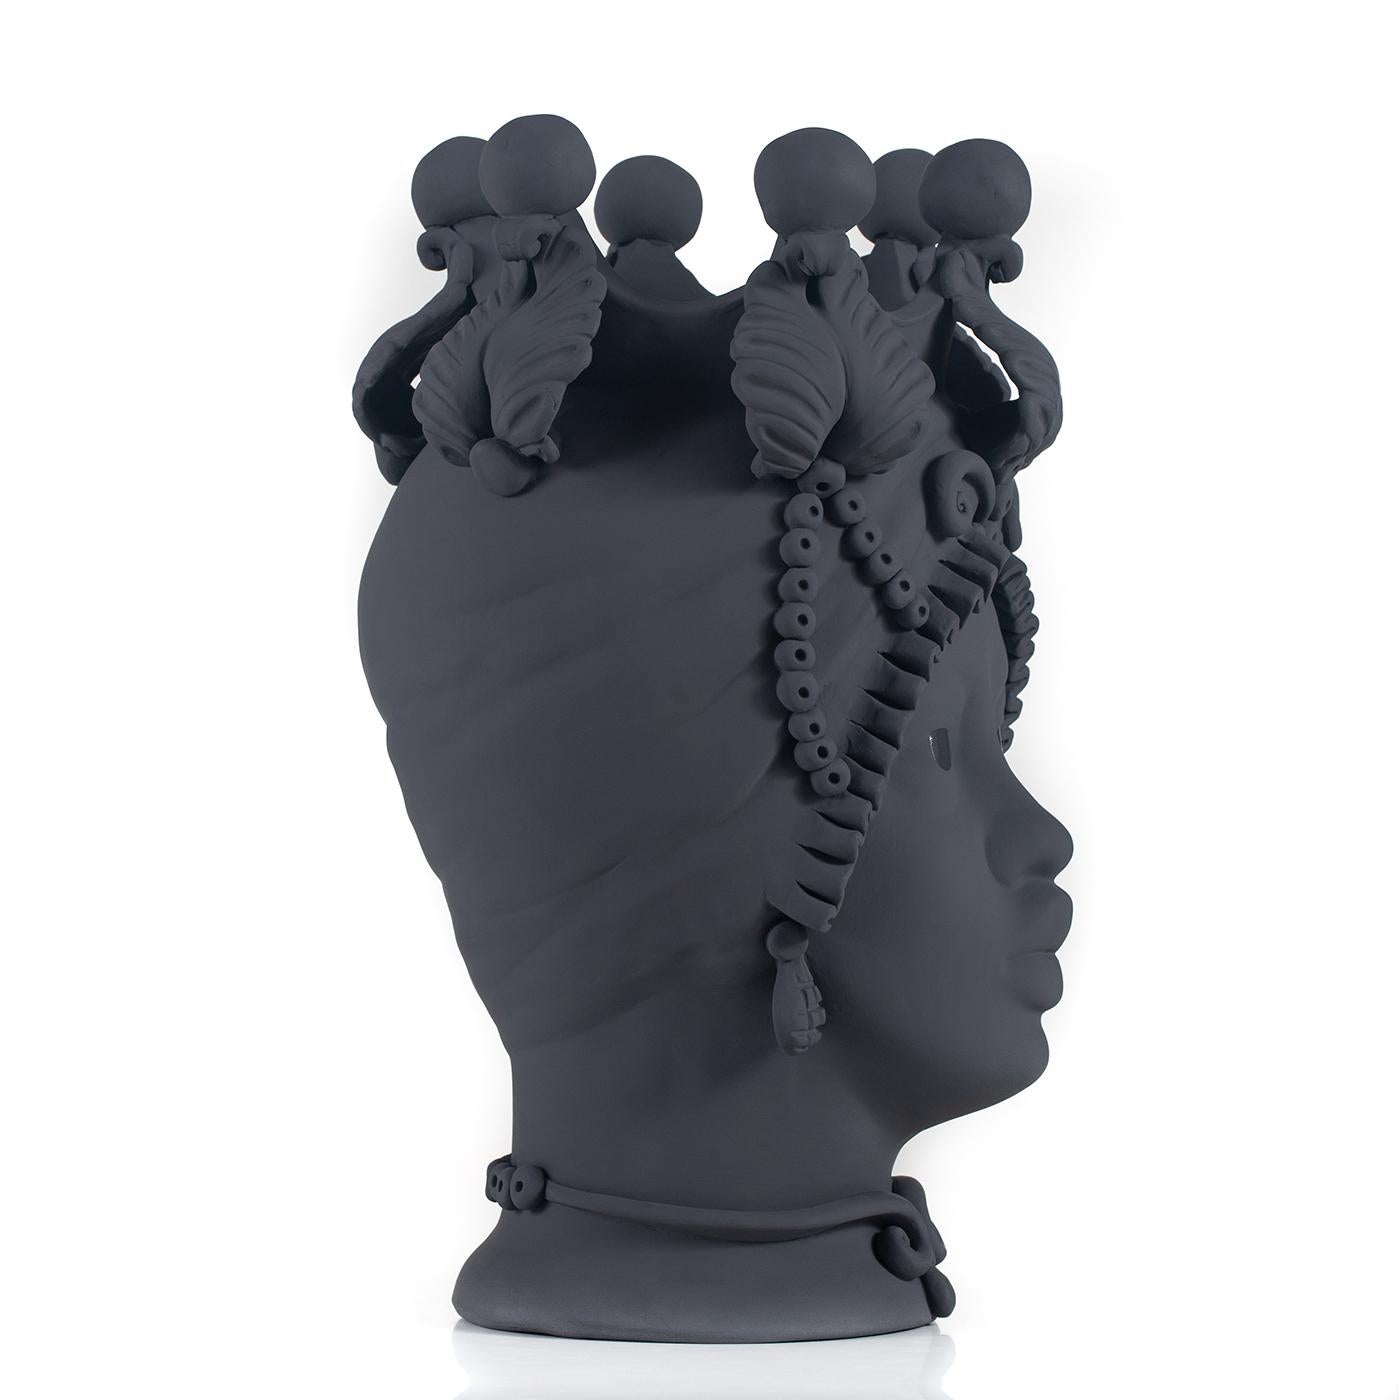 Inspired by Greek mythology, this magnificent range of vases is entirely crafted by hand as in Sicilian tradition. The exquisite Persefone Vase features a matt gray finish and will make a delightful addition to any area in the home or garden,